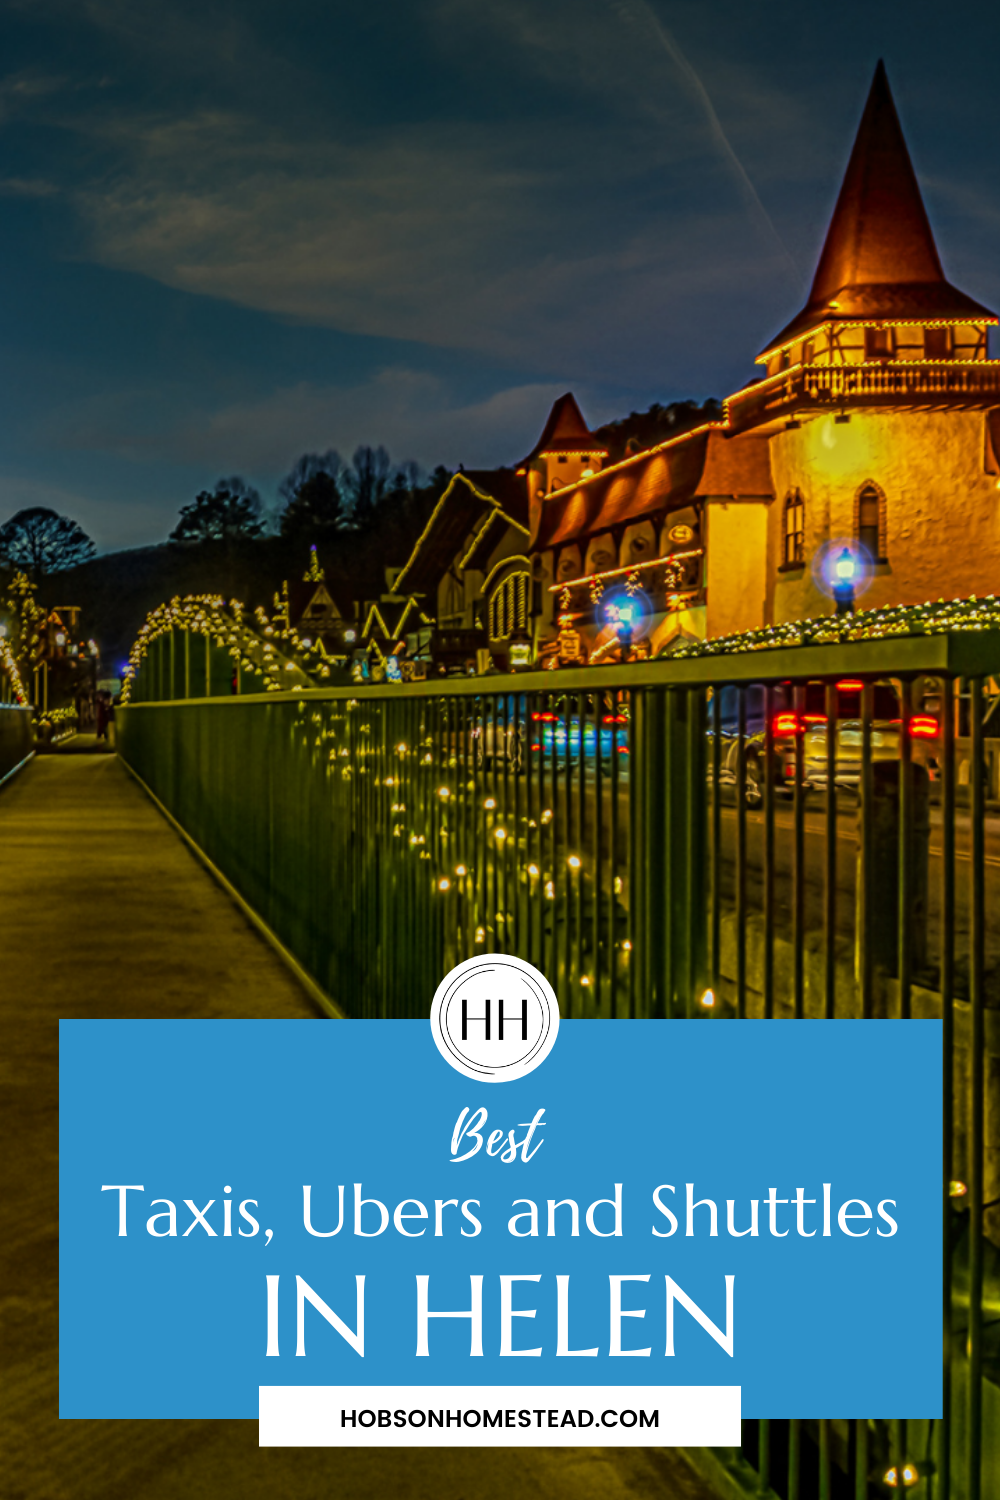 Best Taxi, Uber and Shuttle Services in Helen, Georgia